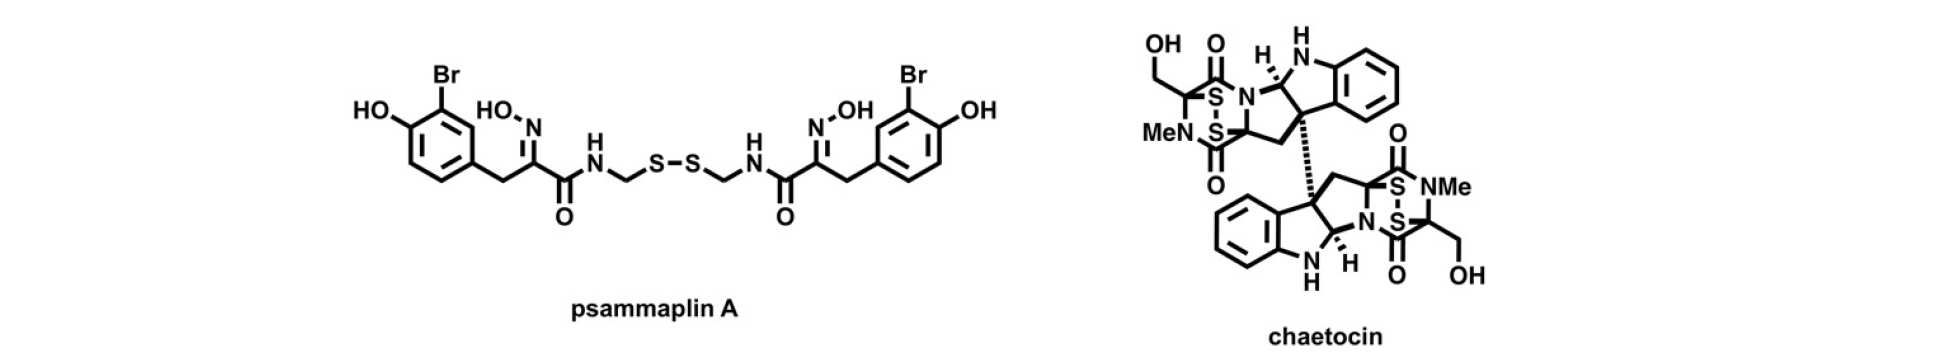 Target-based synthesis